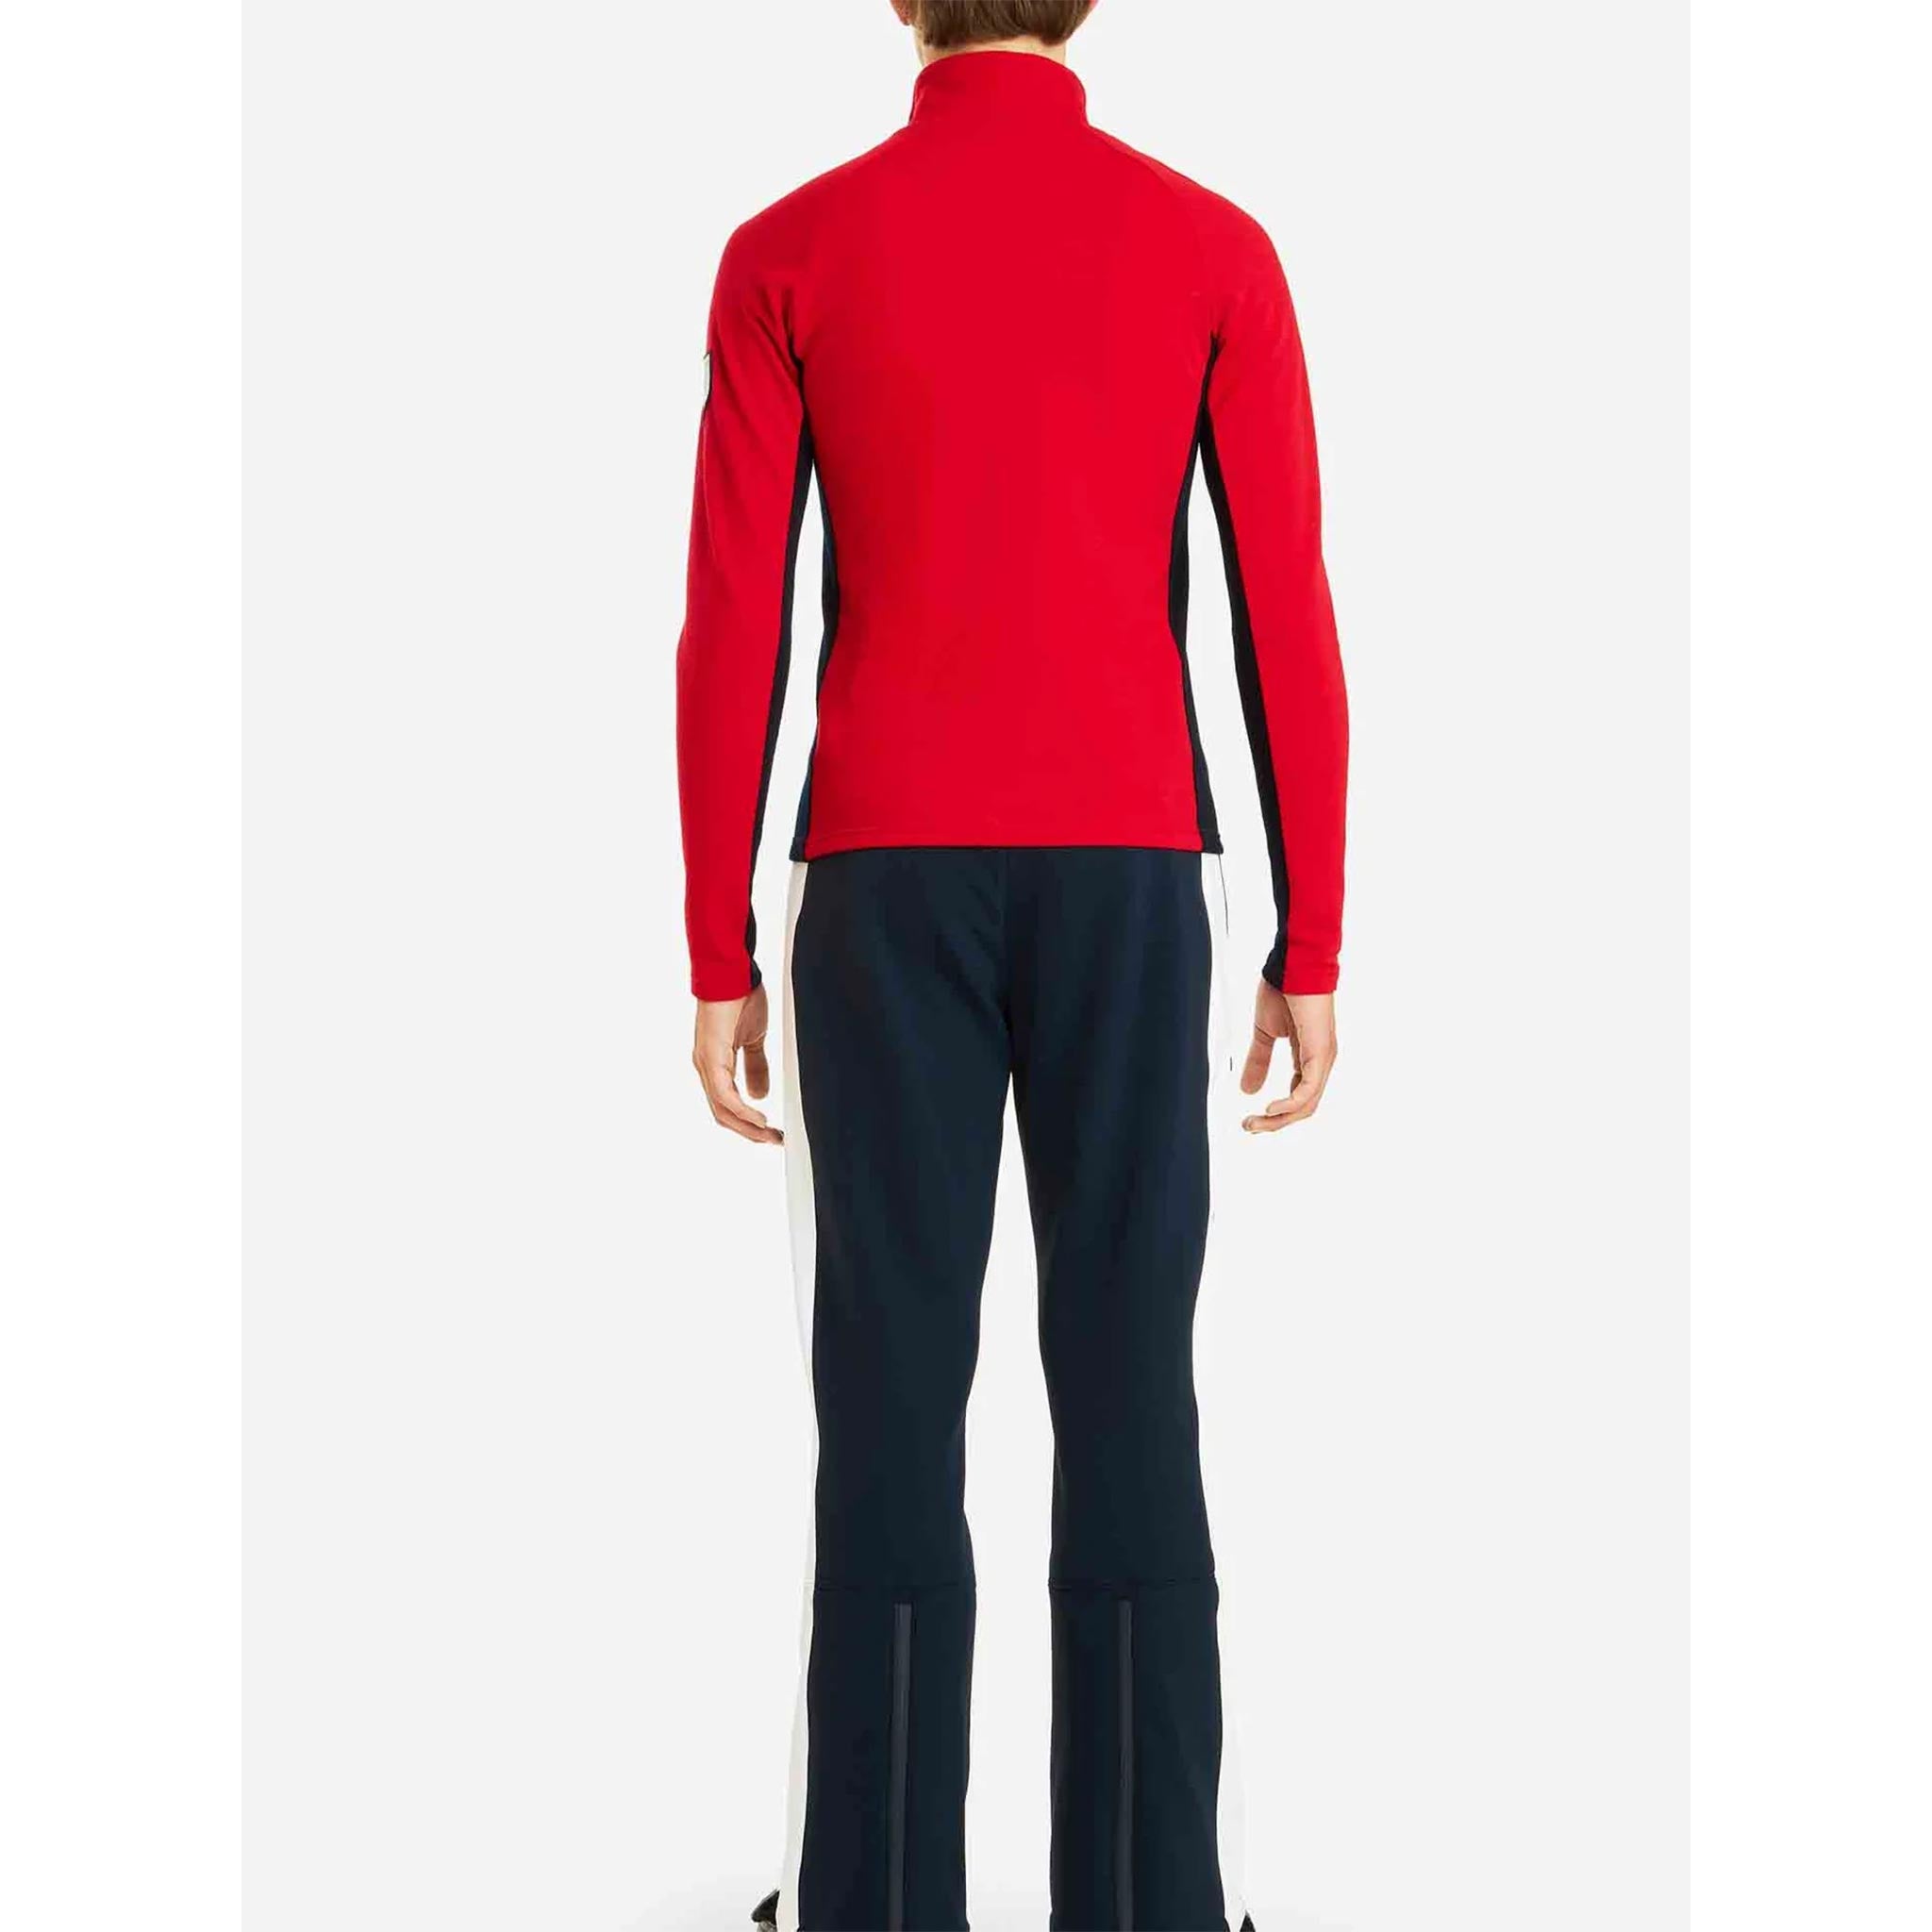 Voss Zipup Sweater in Red